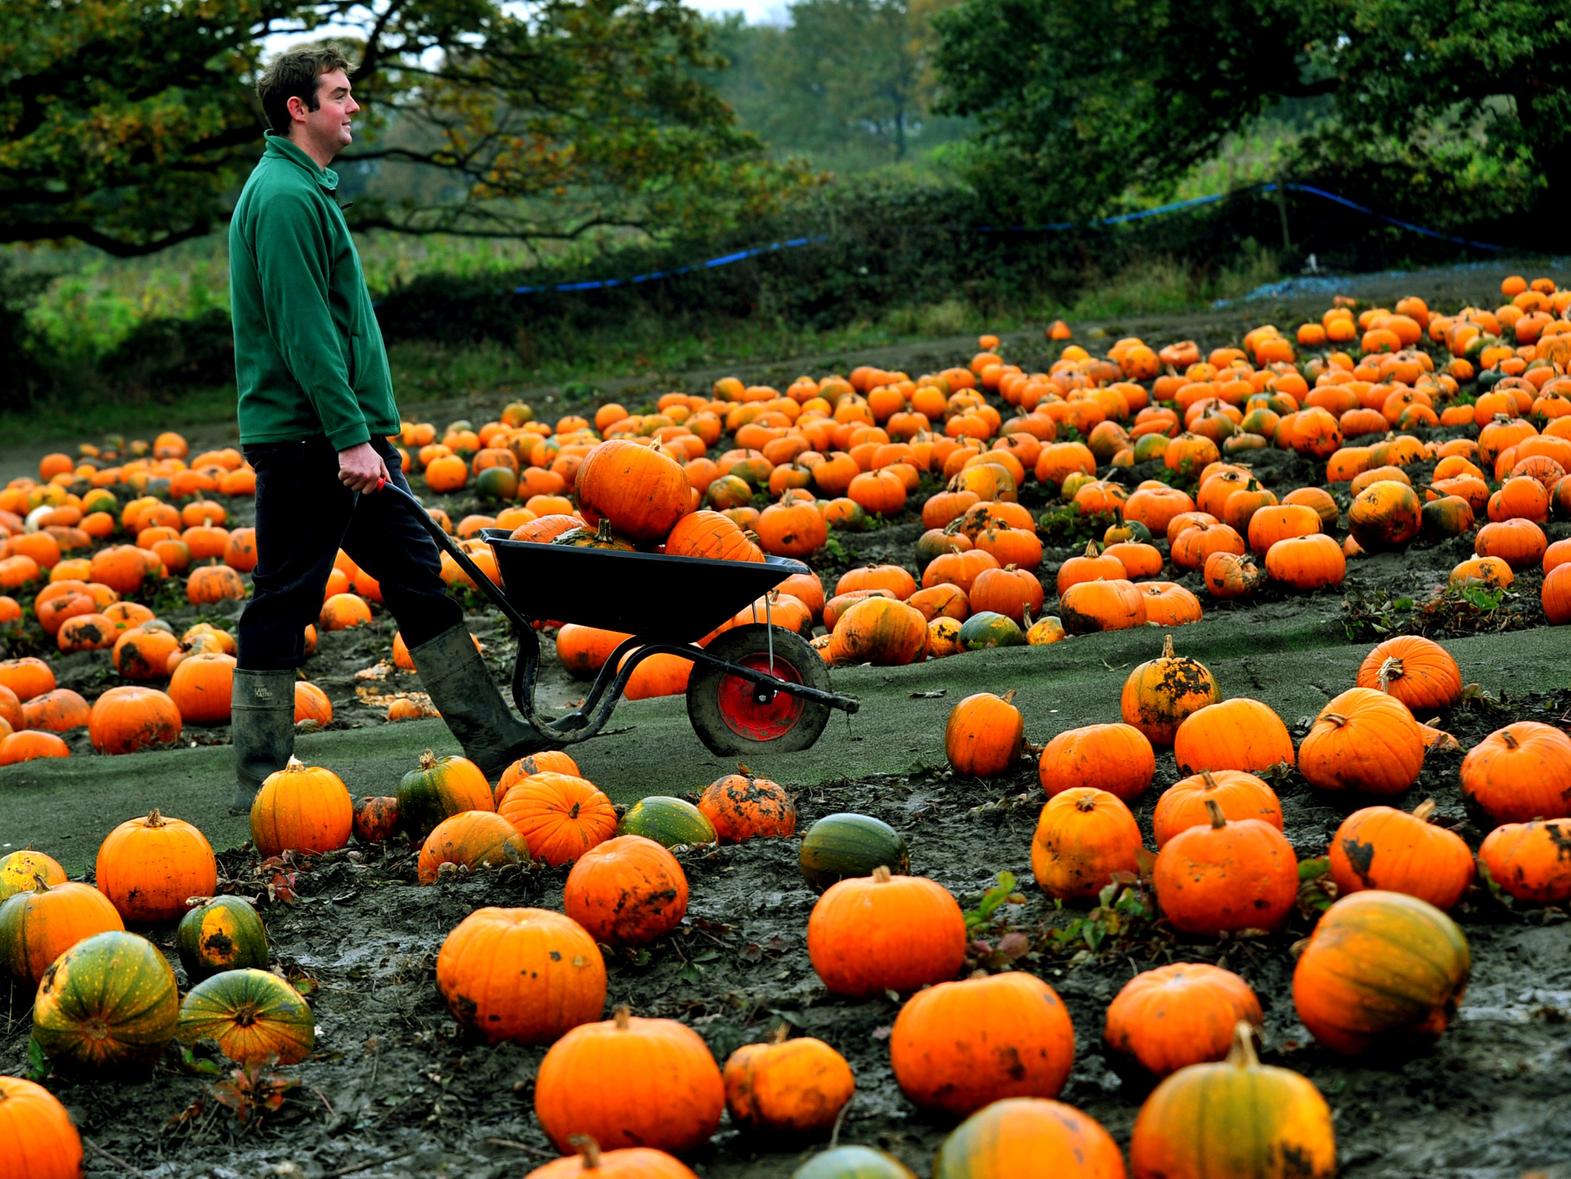 Head to West End Lane Farm in Horsforth to pick your own pumpkin this Halloween. Open now until Thursday 31, every day from 10am to 5pm. There is no entry fee and pumpkins cost 2.50 to 7.50 for standard to jumbo sizes.